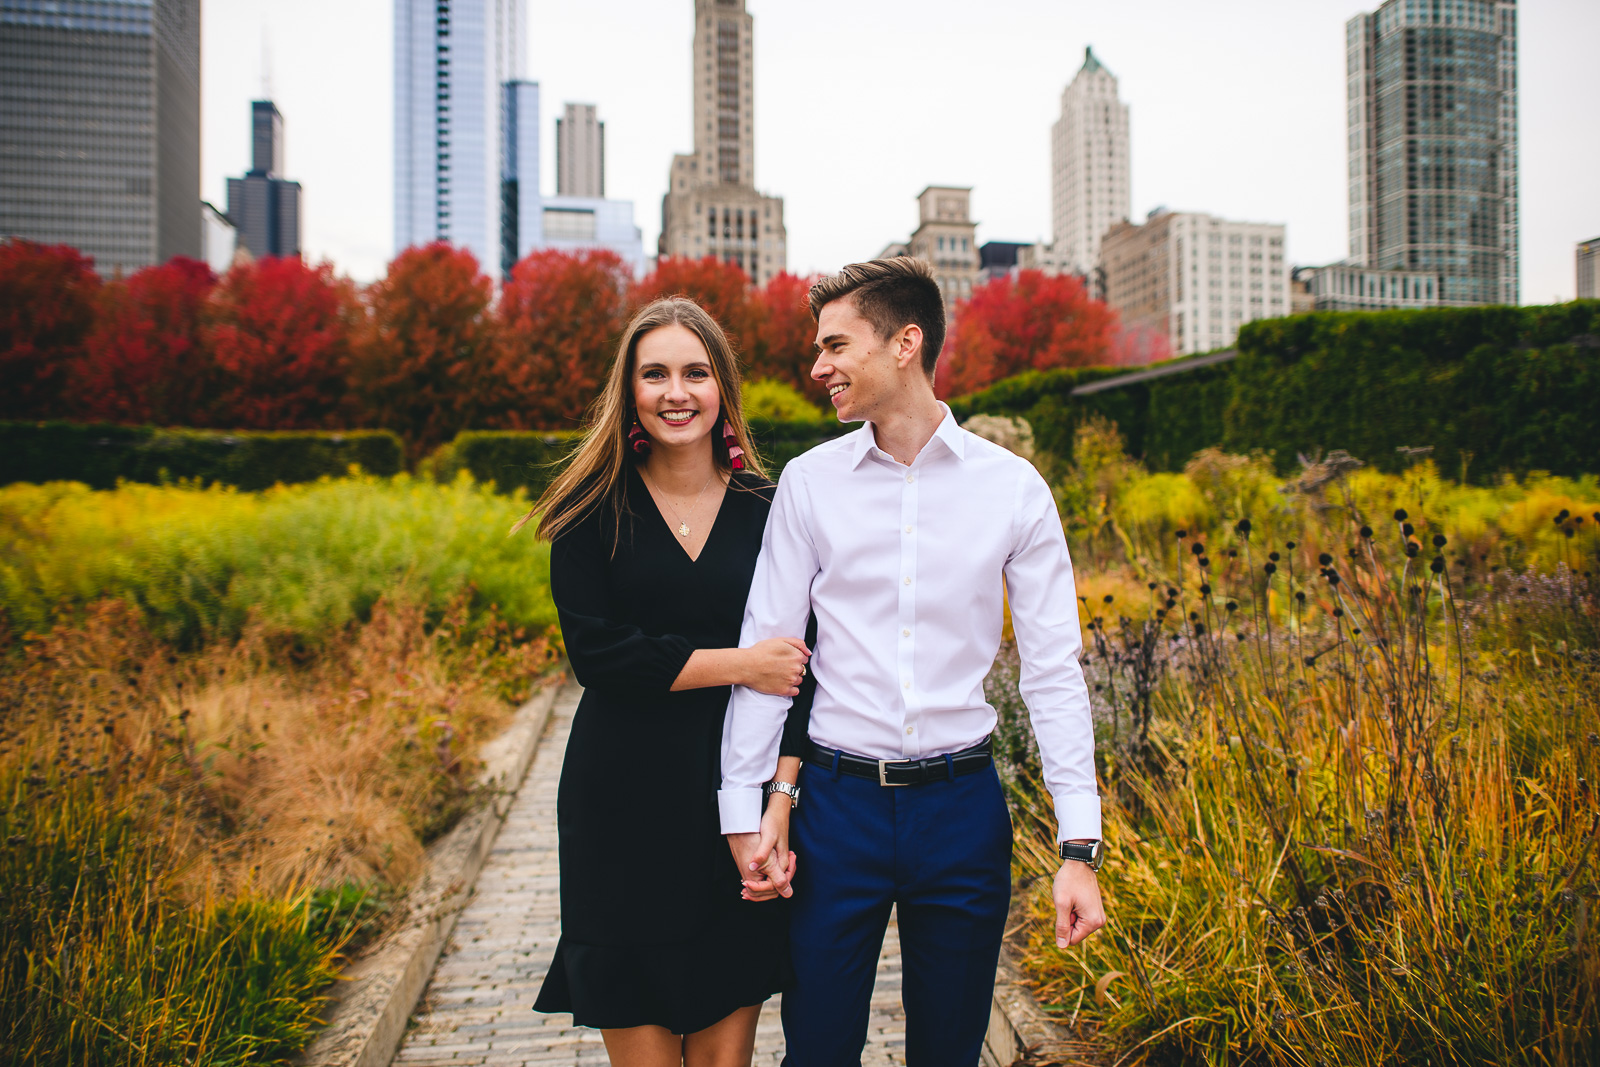 engagement photos in the fall - Chicago Fall Engagement Photos // Marta + Kevin